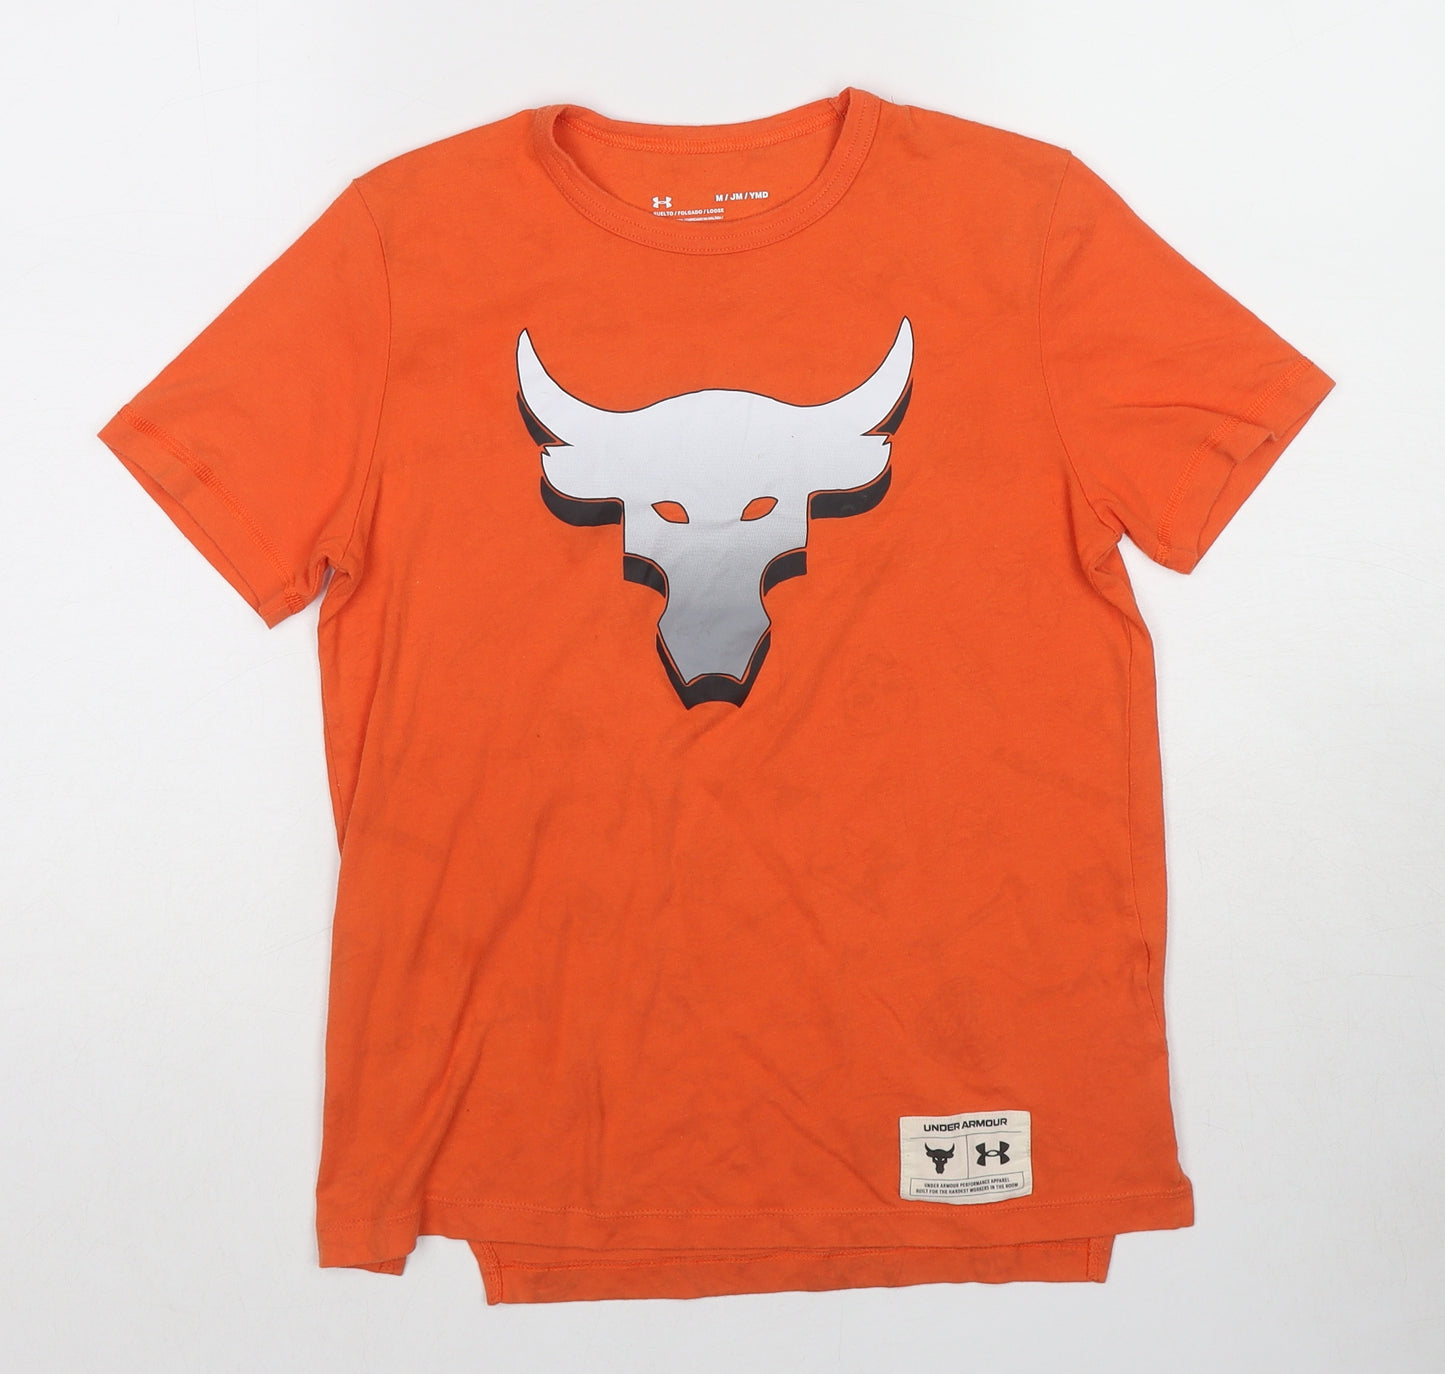 Under armour Boys Orange Cotton Pullover T-Shirt Size 10-11 Years Round Neck Pullover - Size age 10-12 years